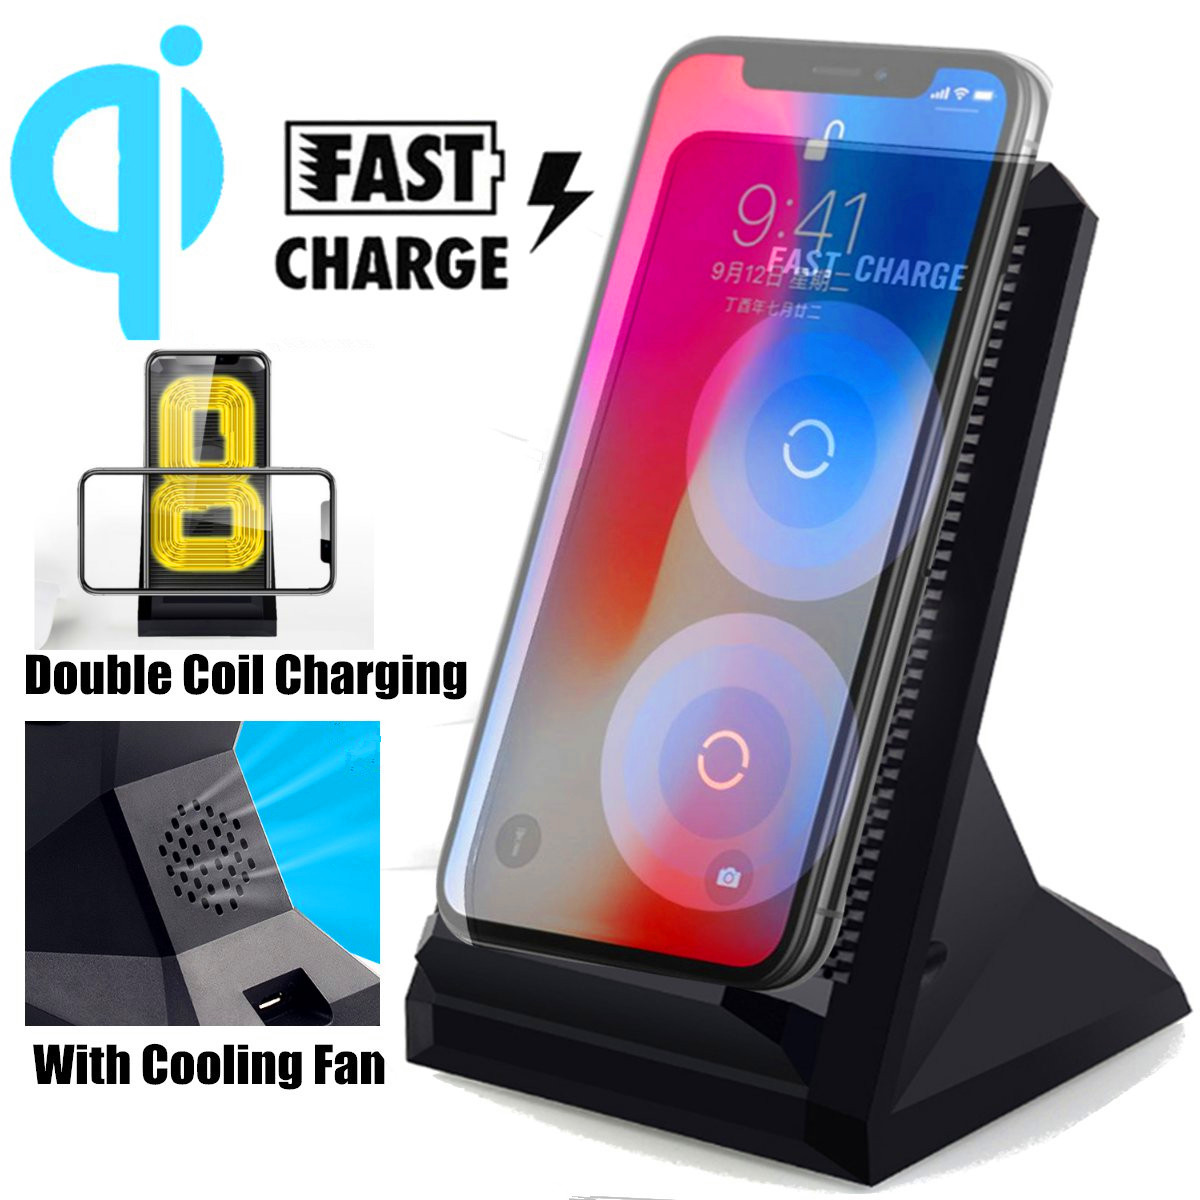 10W-Qi-Wireless-Charger-Fast-Charging-With-Cooling-Fan-Phone-Holder-For-iPhone-Samsung-Huawei-1422834-1